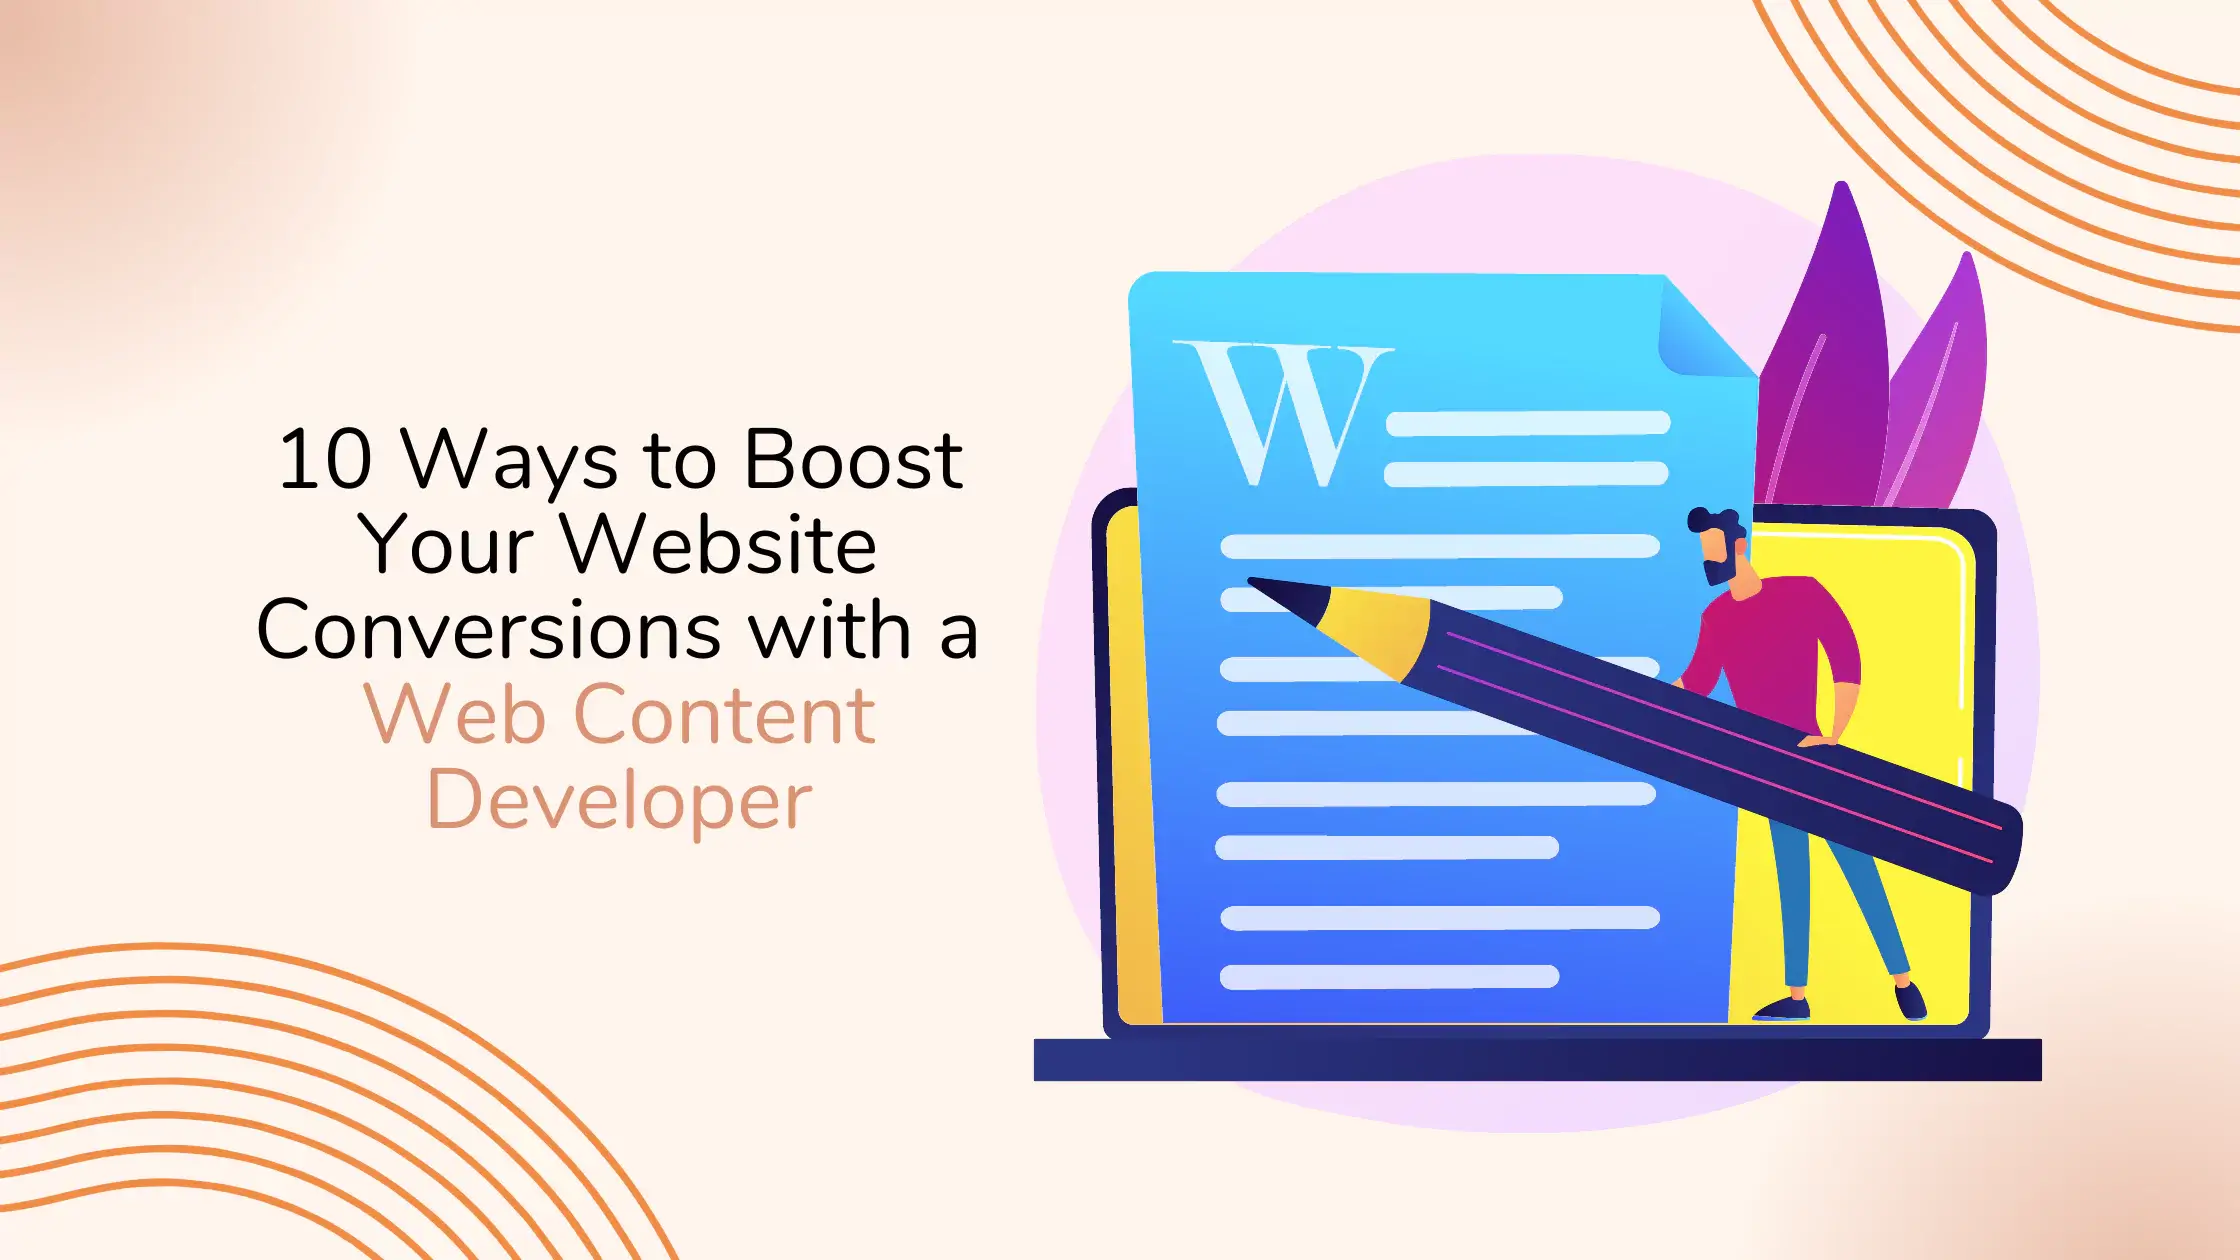 10-ways-to-boost-your-website-conversions-with-a-web-content-developer